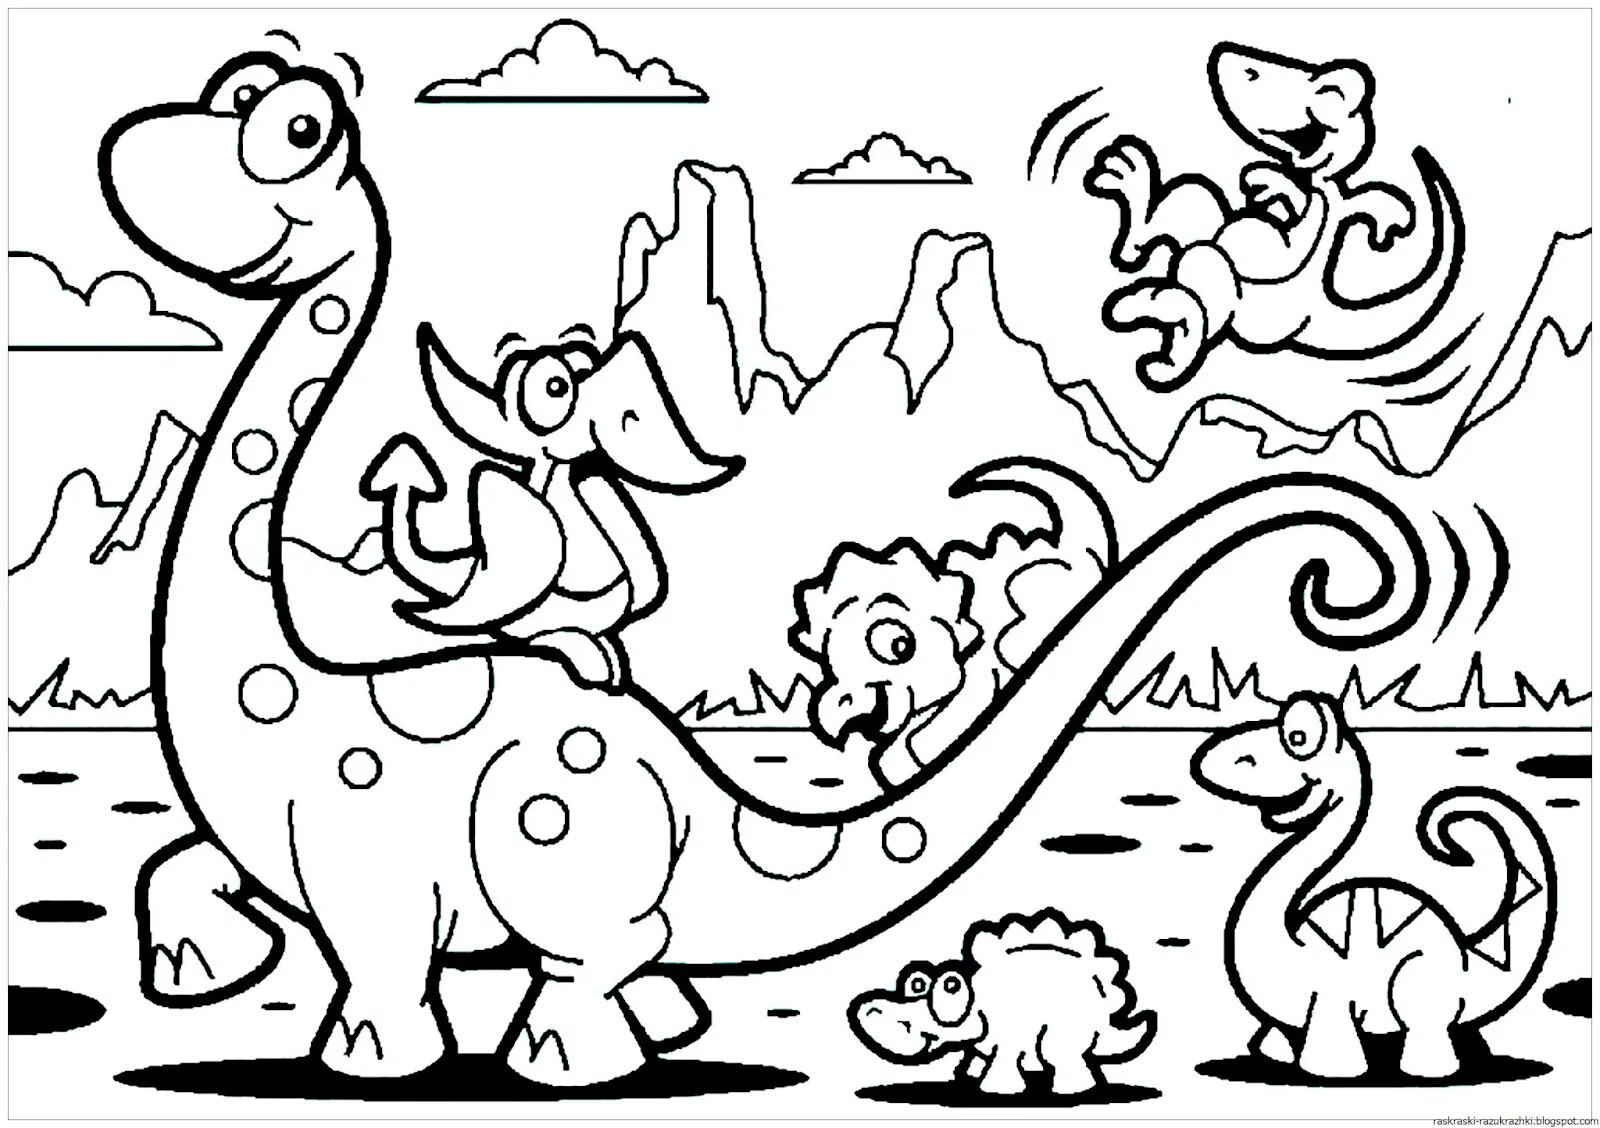 Funny dinosaur coloring pages